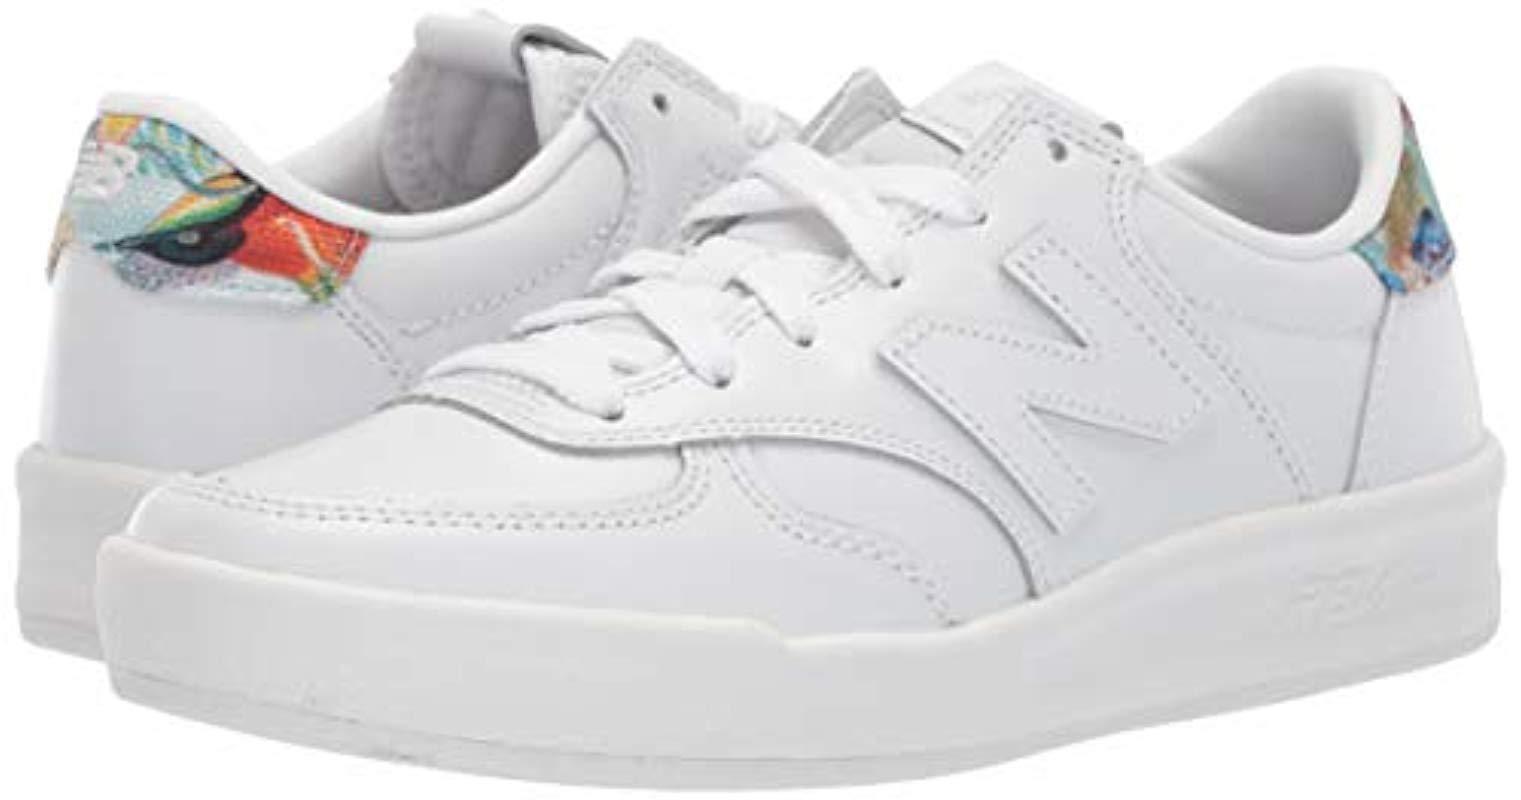 New Balance Canvas 300 V1 Court Sneaker in White/Print (White) - Save 73% |  Lyst